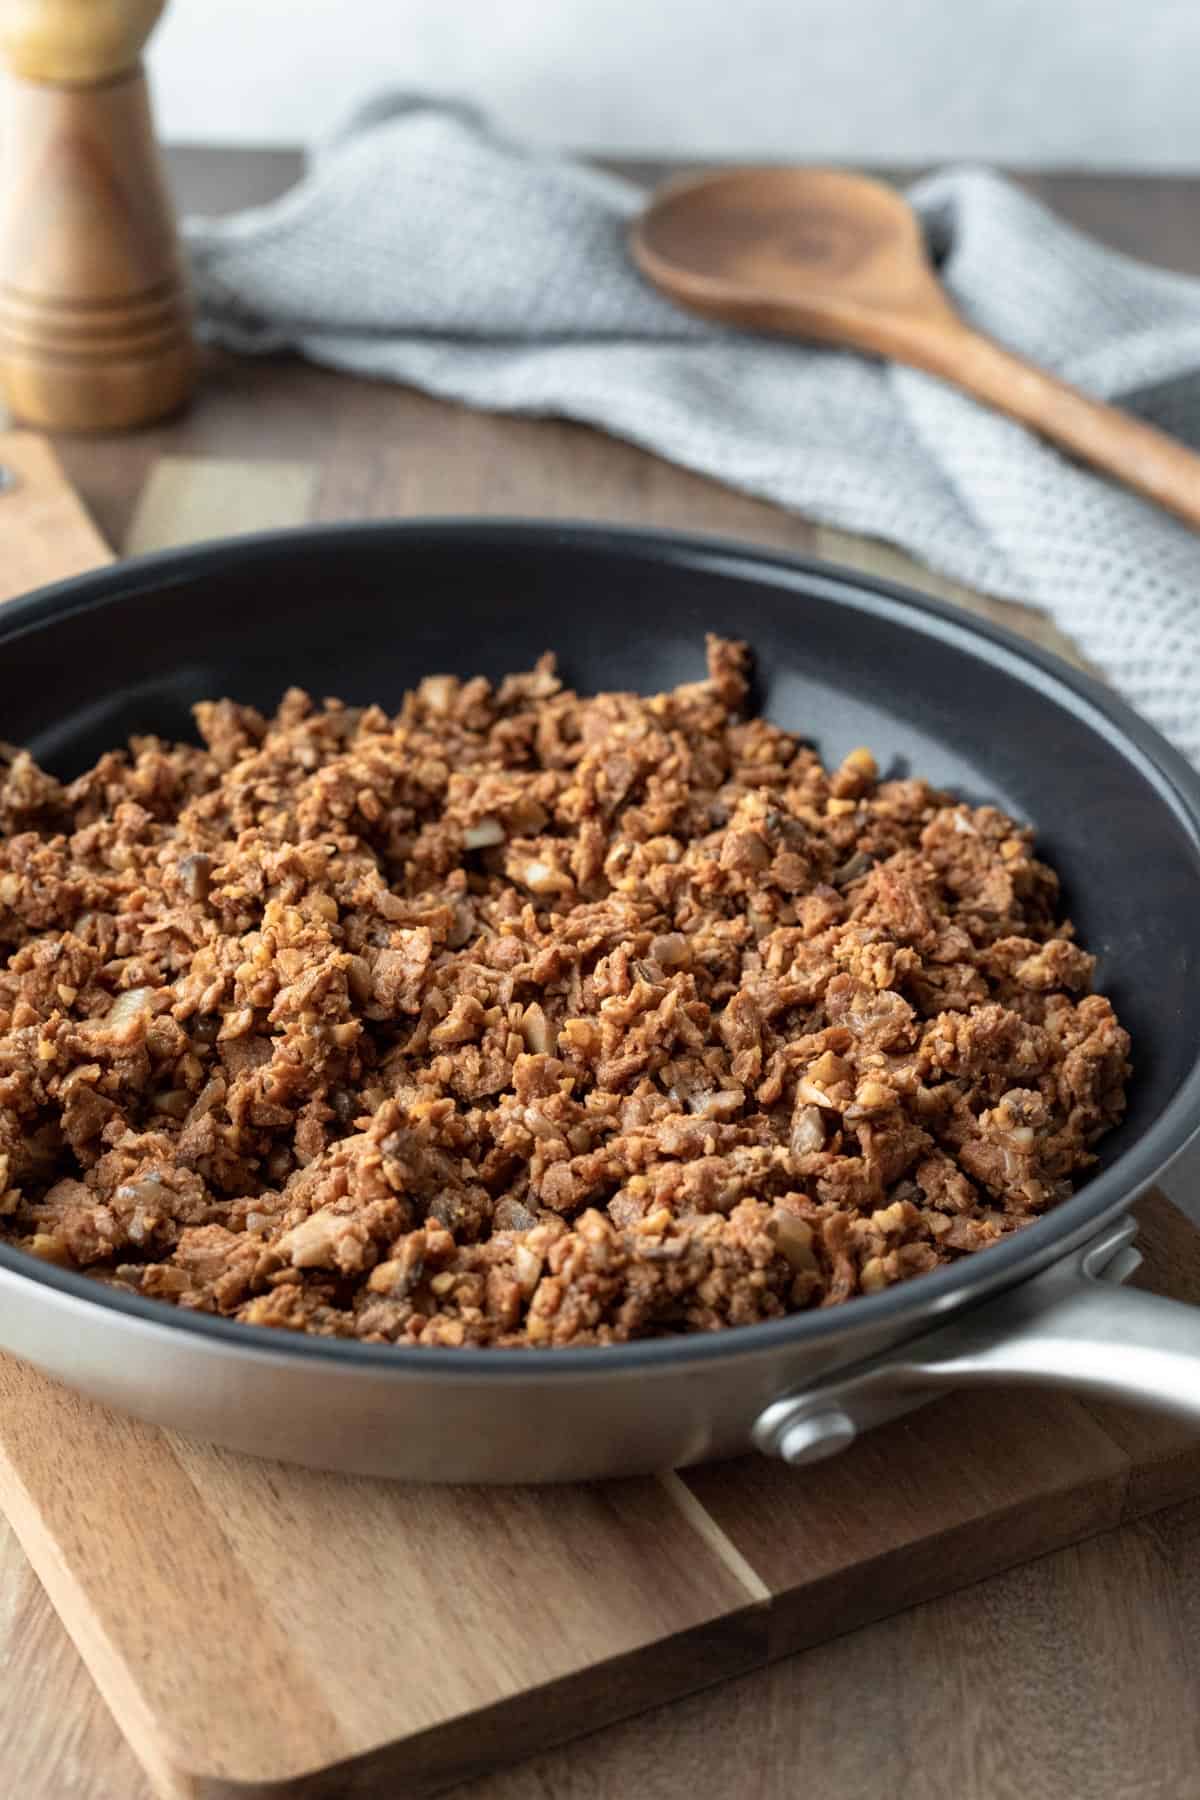 Crumbly homemade soy beef substitute in a non-stick skillet.